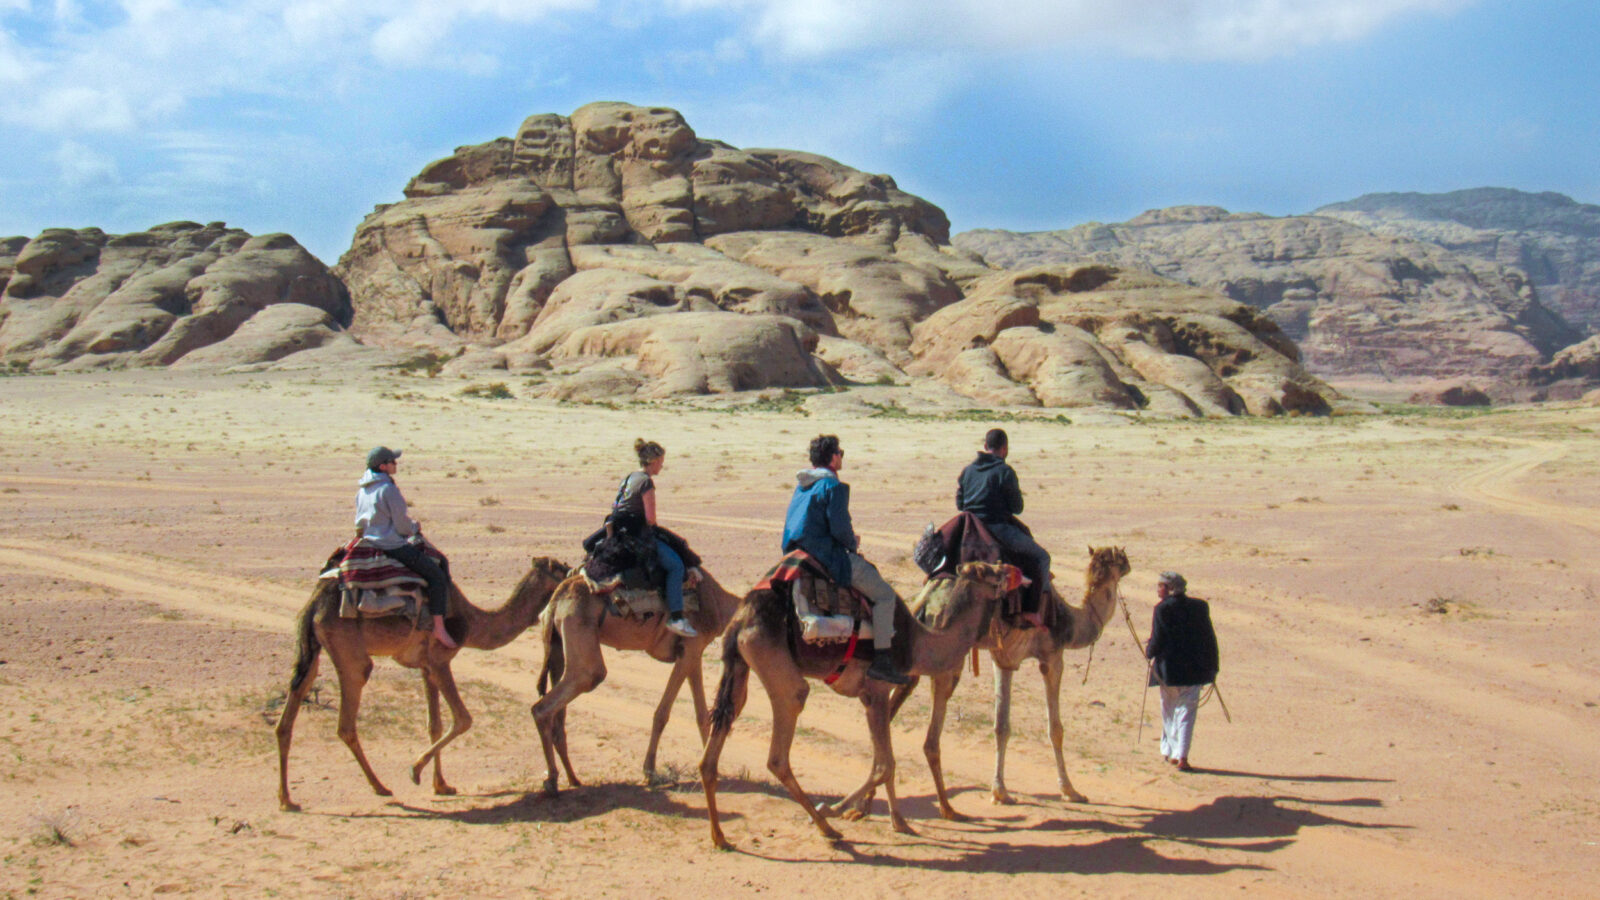 small group of people ride camels across the sandy desert